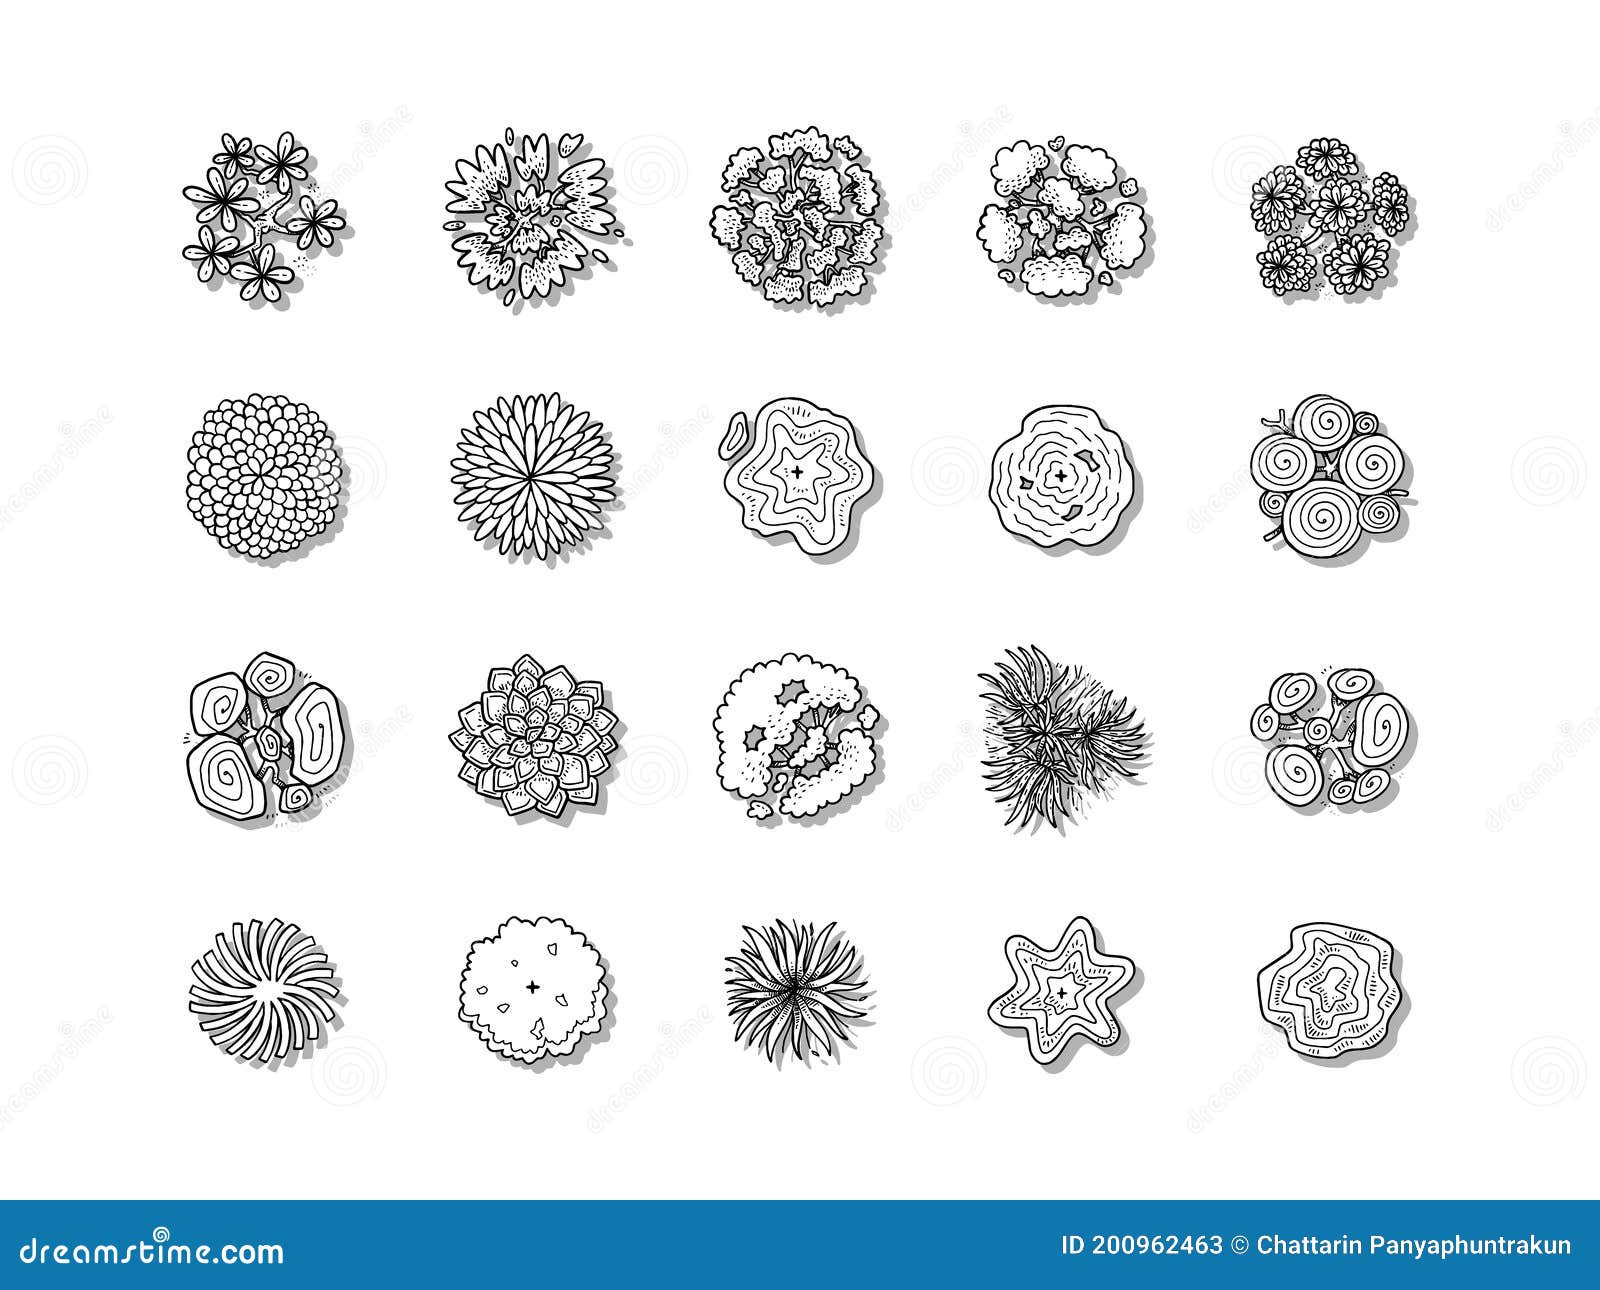 Hand Drawn Vector Illustration Set of Top View Tree Isolated on White ...